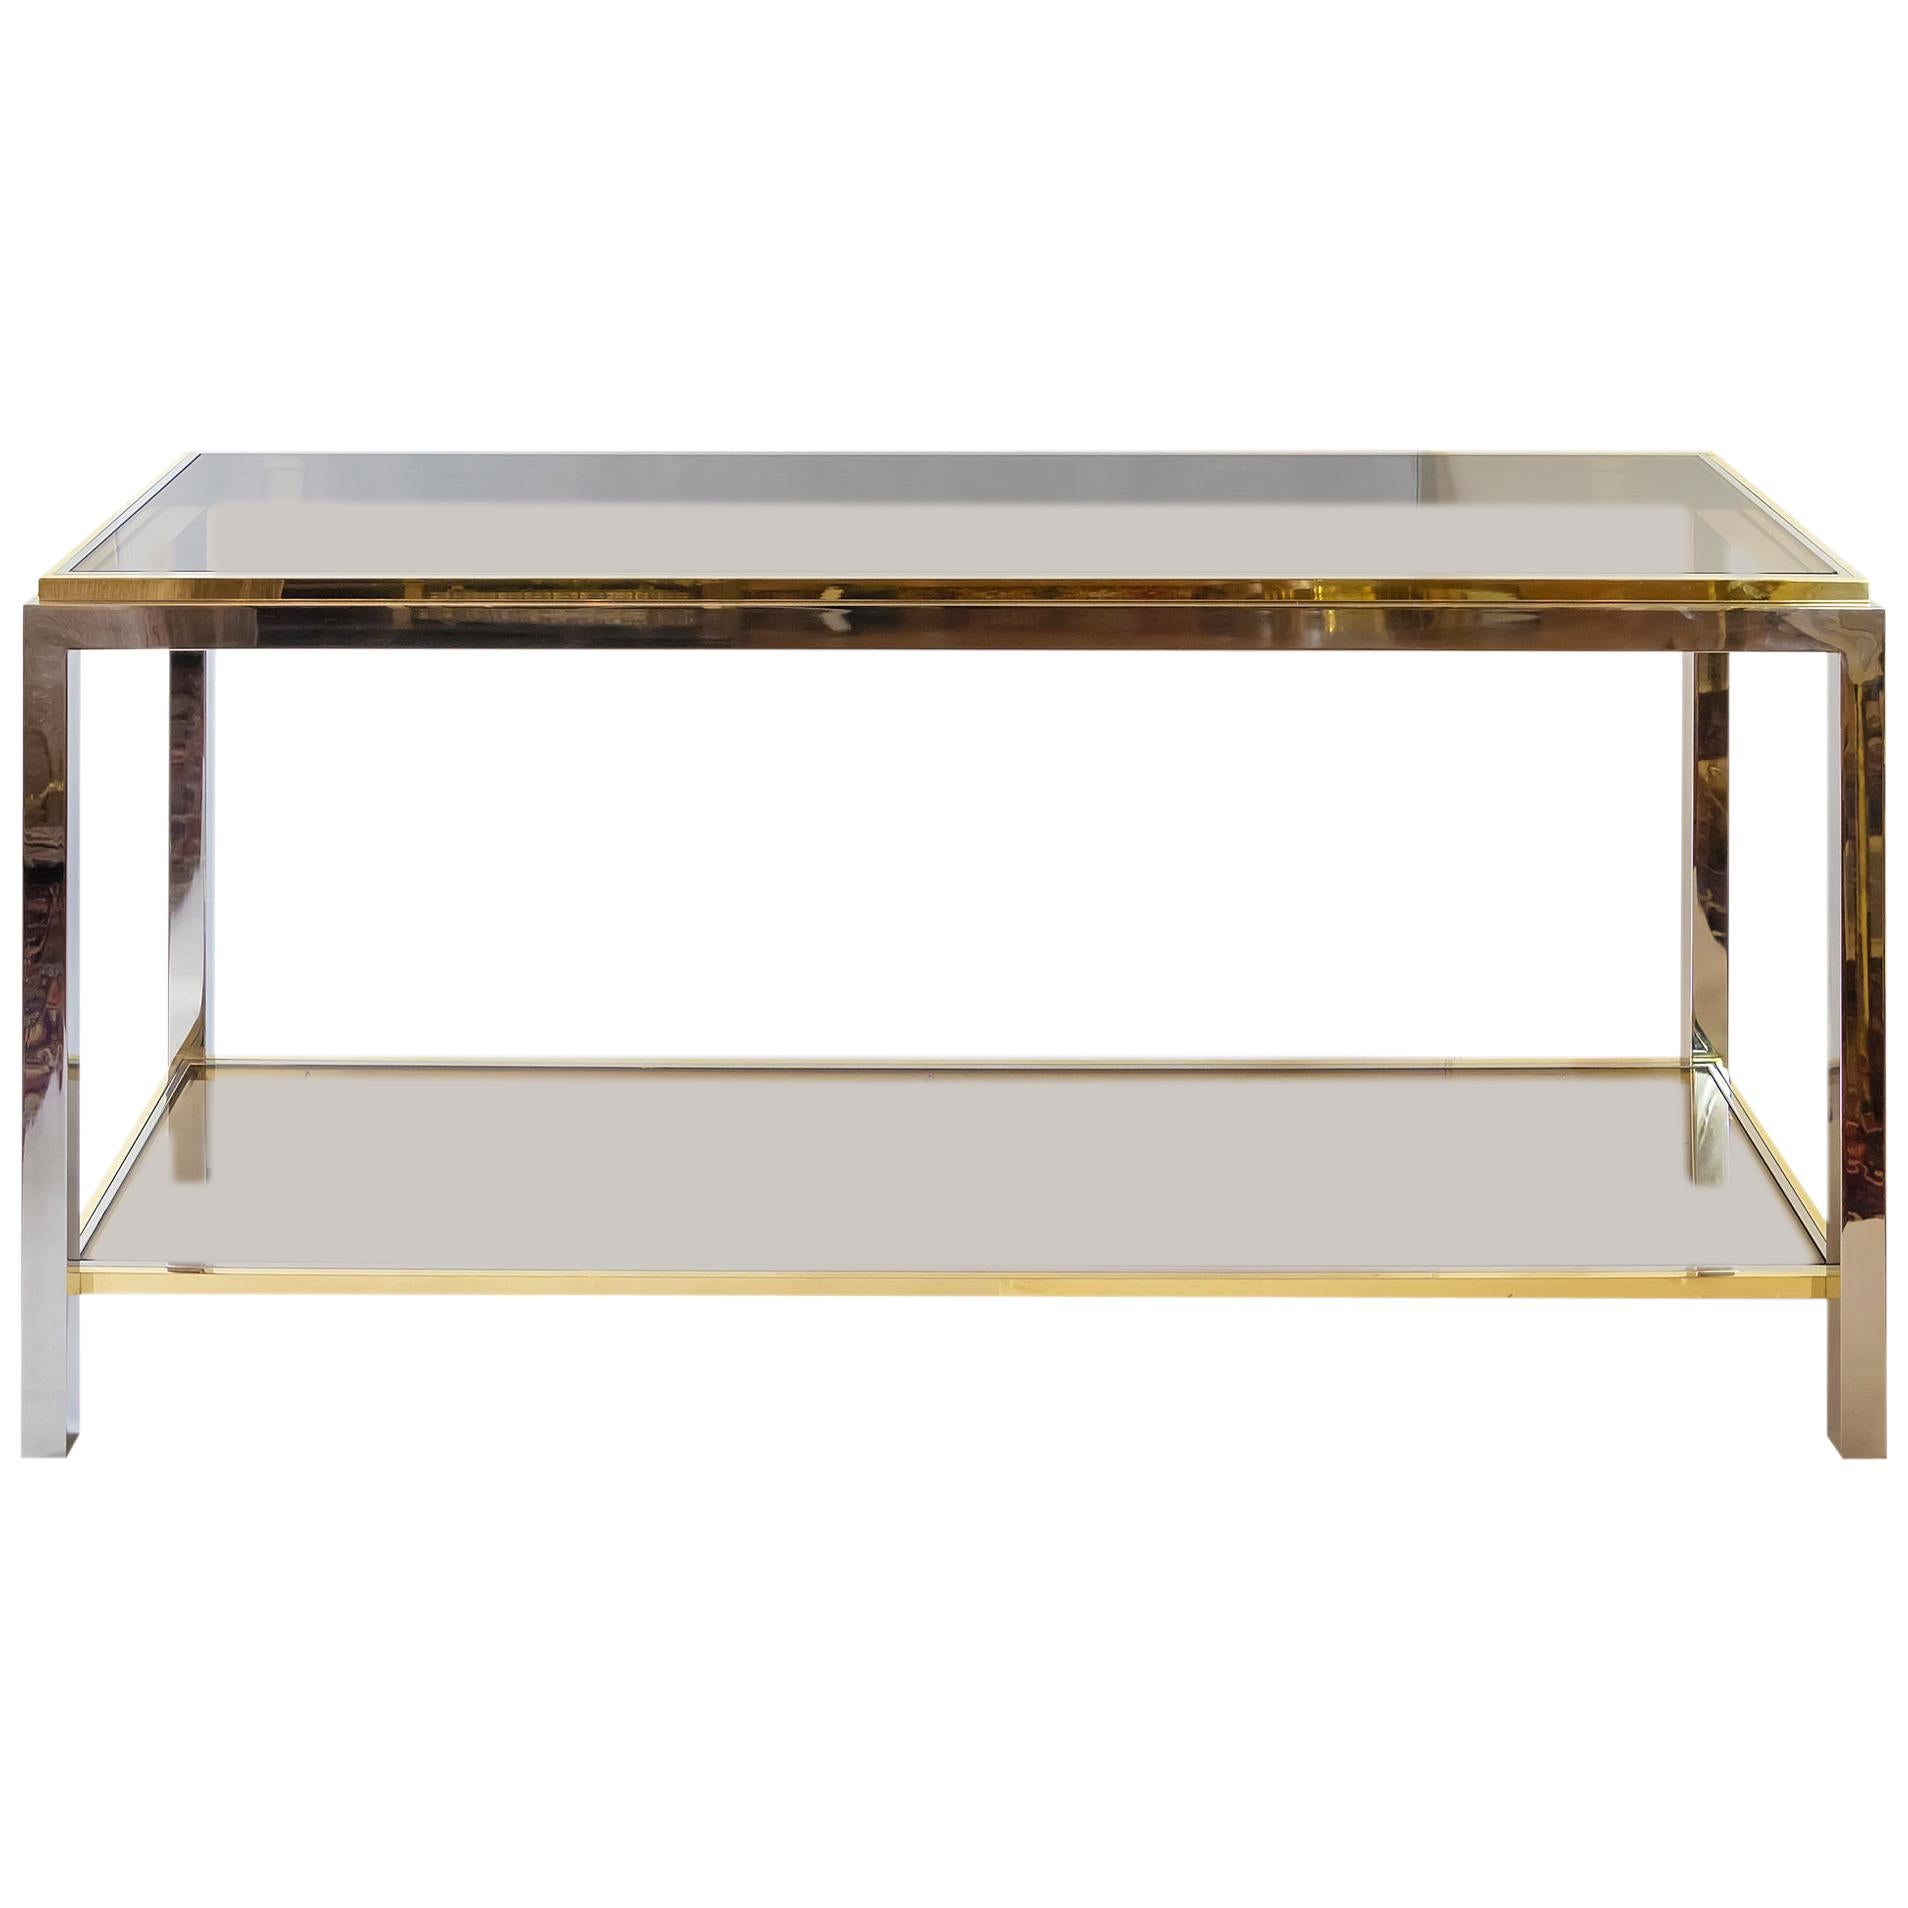 Midcentury Brass, Chrome and Glass Console Table, by Jean Charles